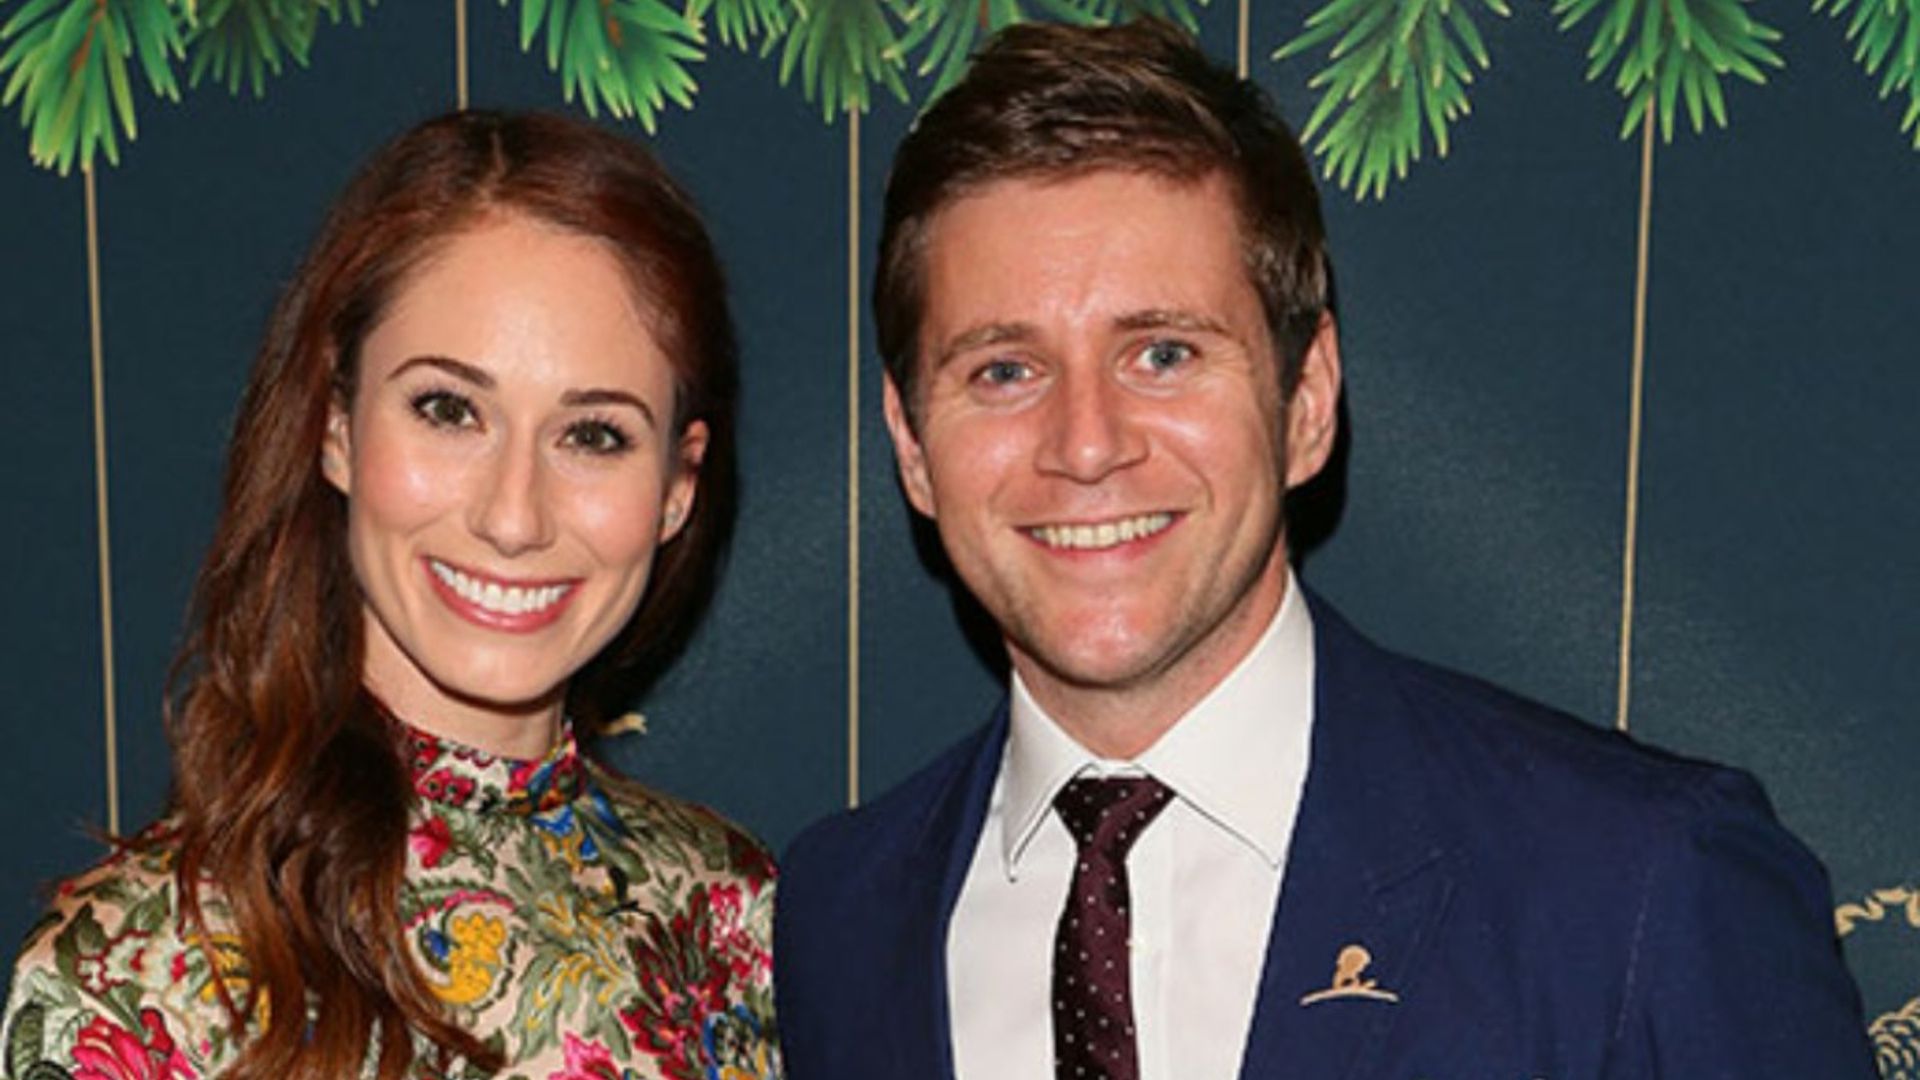 Downton Abbey's Allen Leech reveals gender of second child in most adorable way